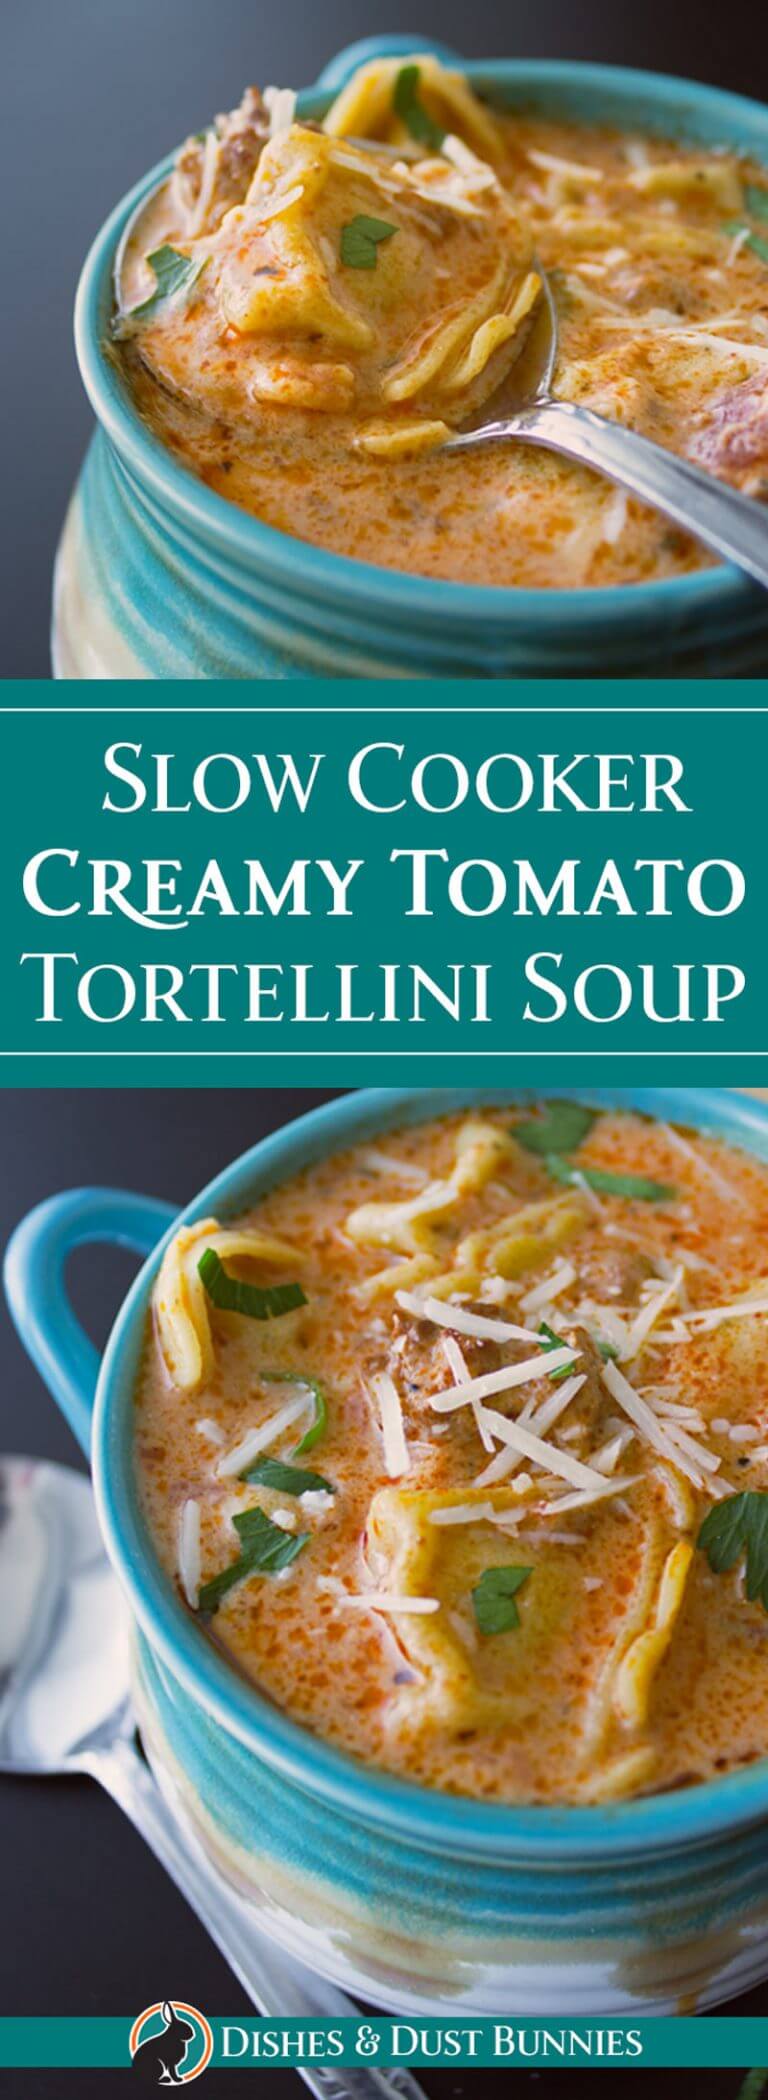 Slow Cooker Creamy Tomato Tortellini Soup - Dishes & Dust Bunnies